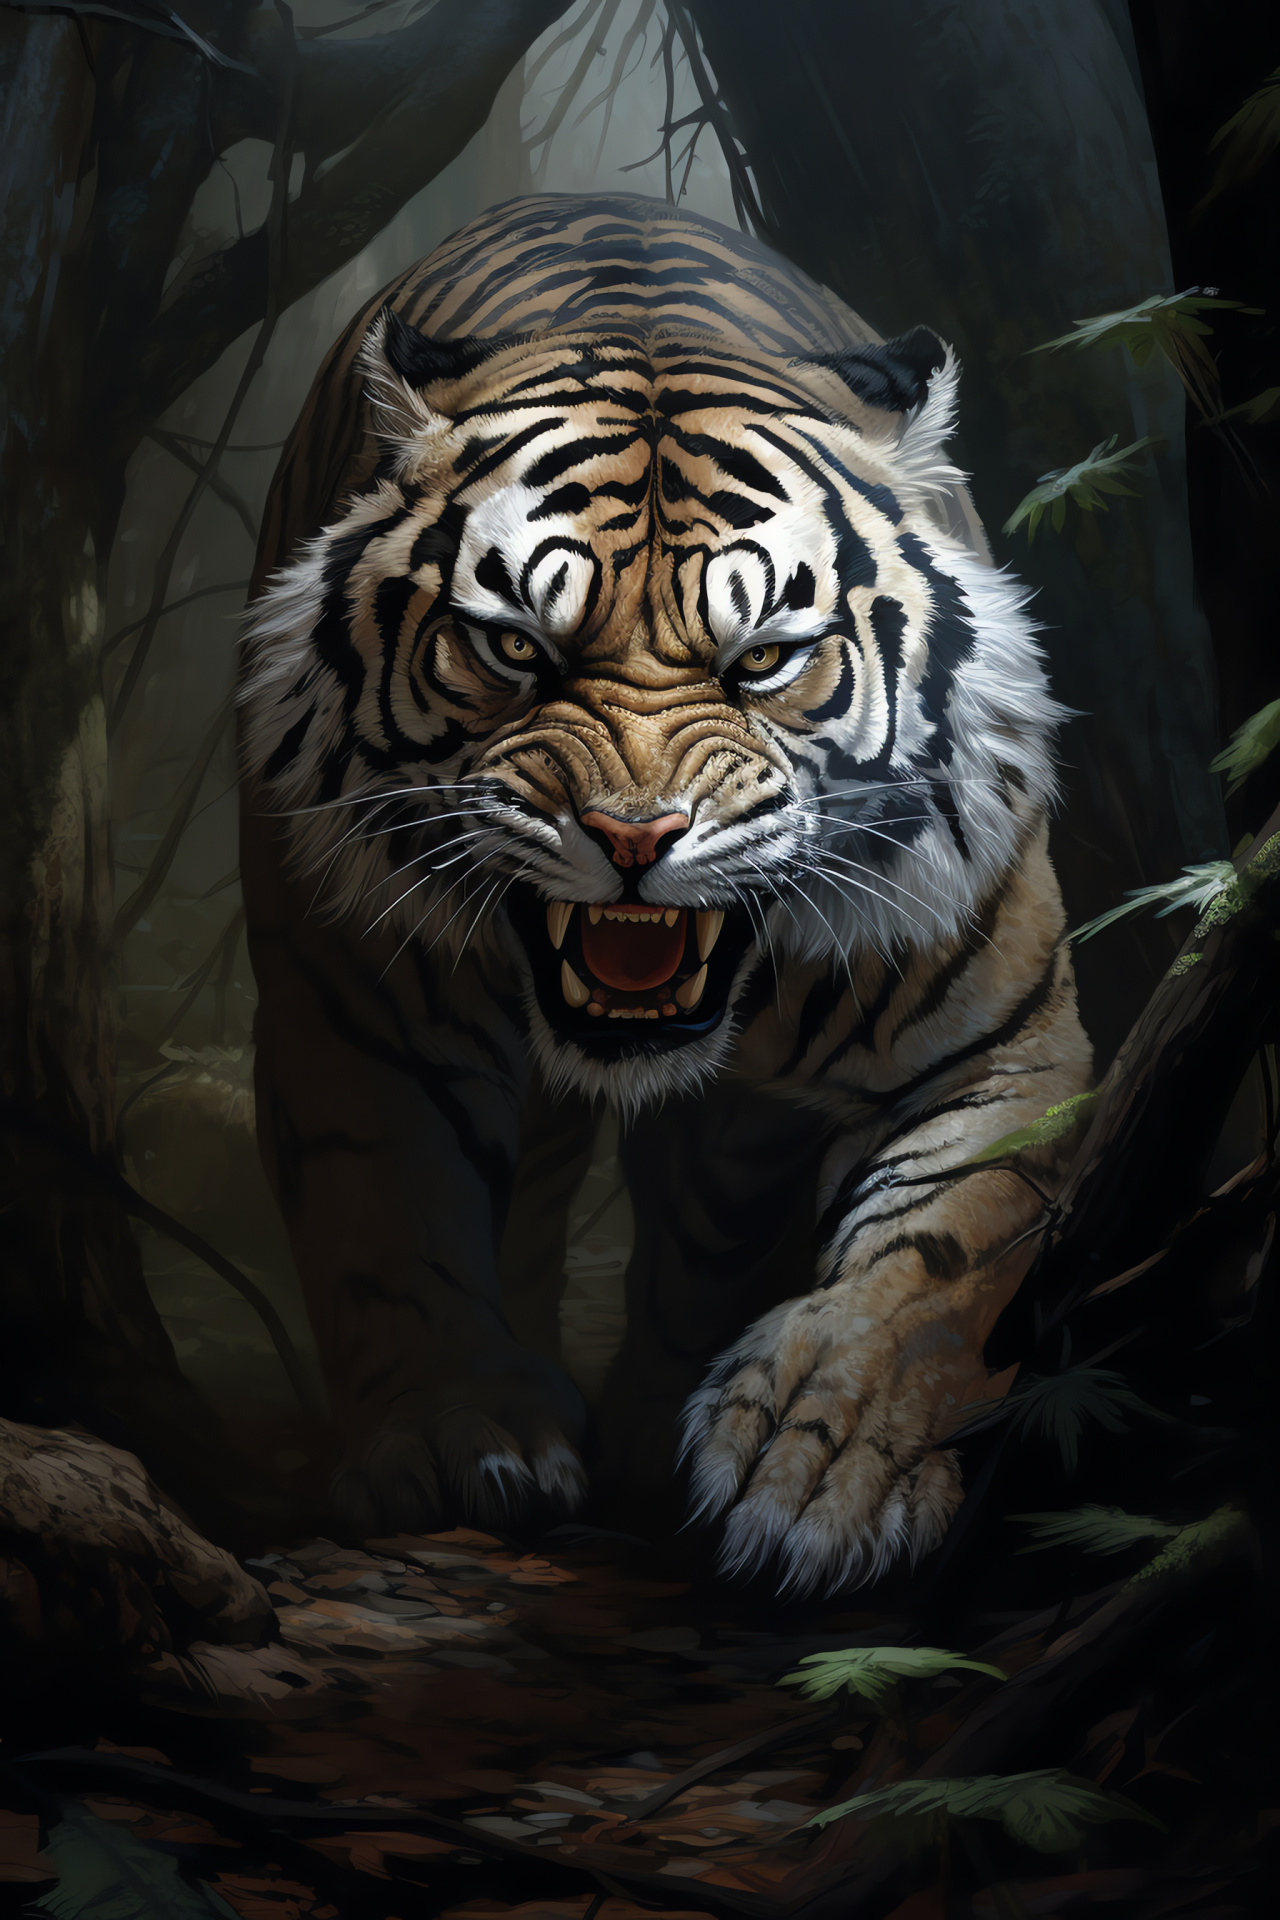 Fierce Saber Tooth, Prey-stalking fangs, Monochrome forest setting, Stealth gaze, Primeval camouflage, HD Phone Image